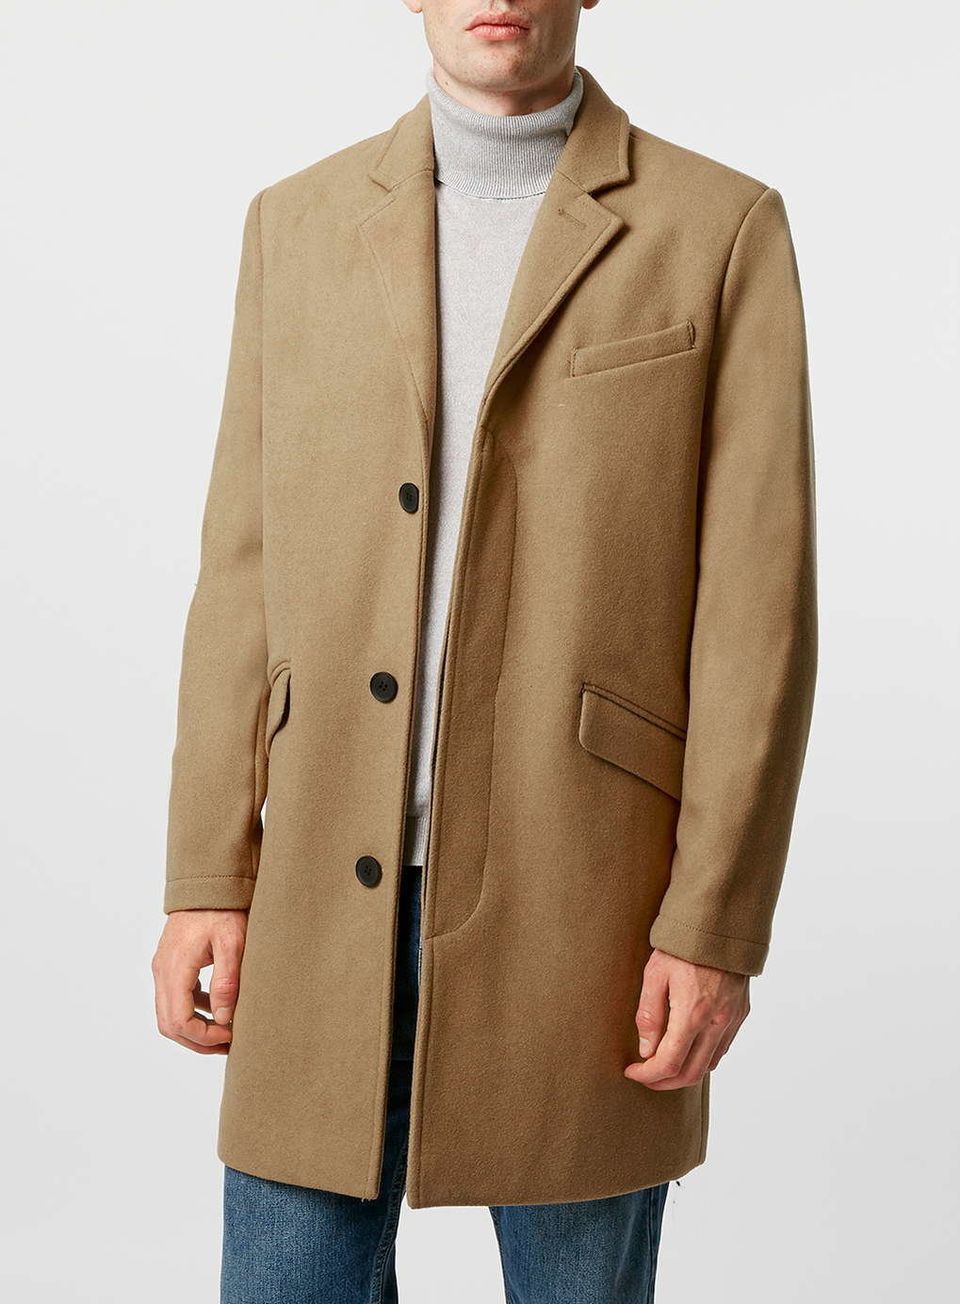 A Guide To Classic Camel Coats, Because Everyone Needs One | HuffPost Life